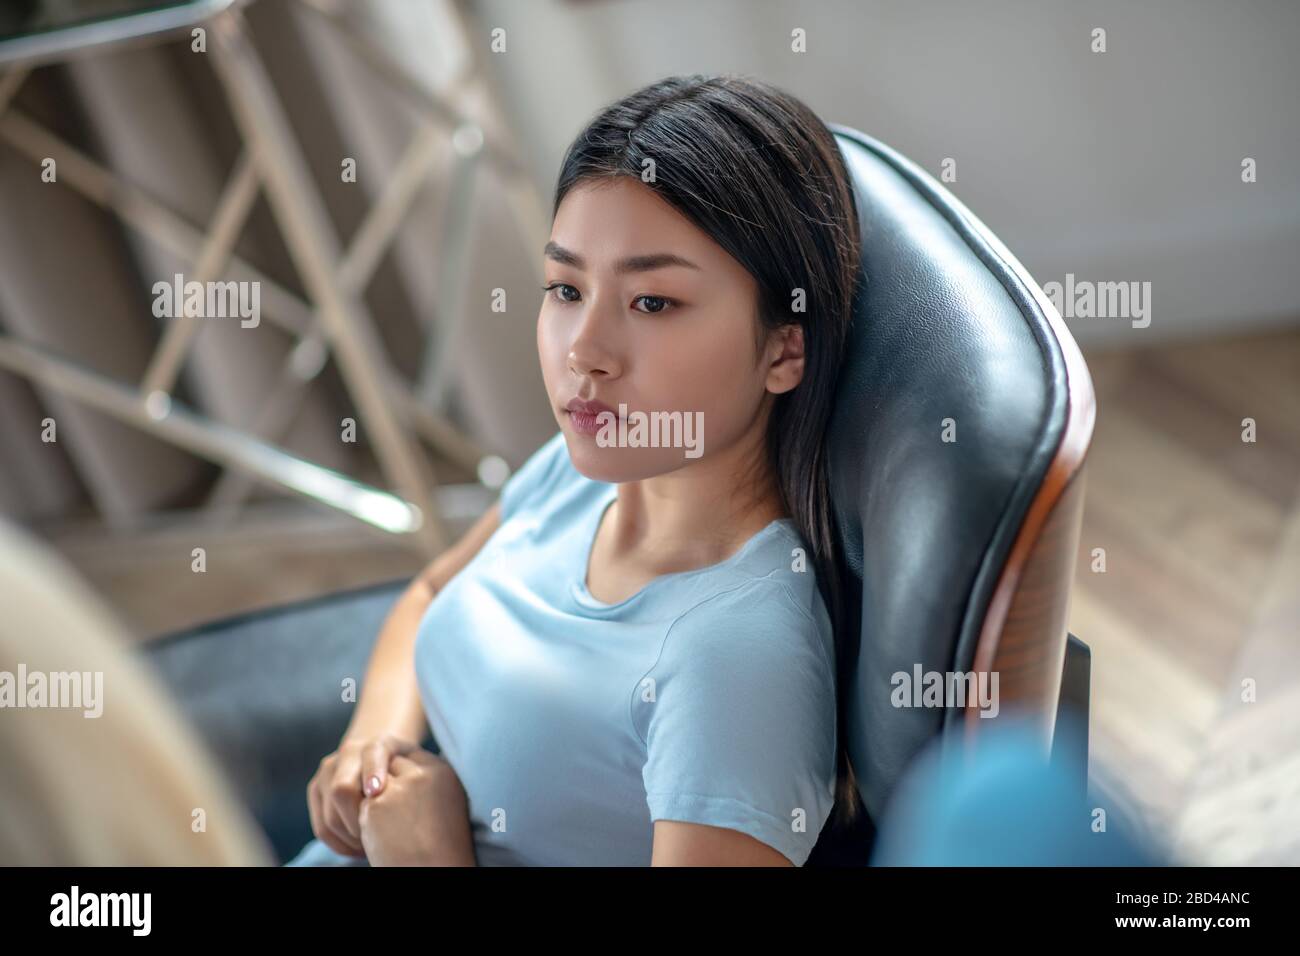 Pretty asian young woman with long hair looking serious Stock Photo